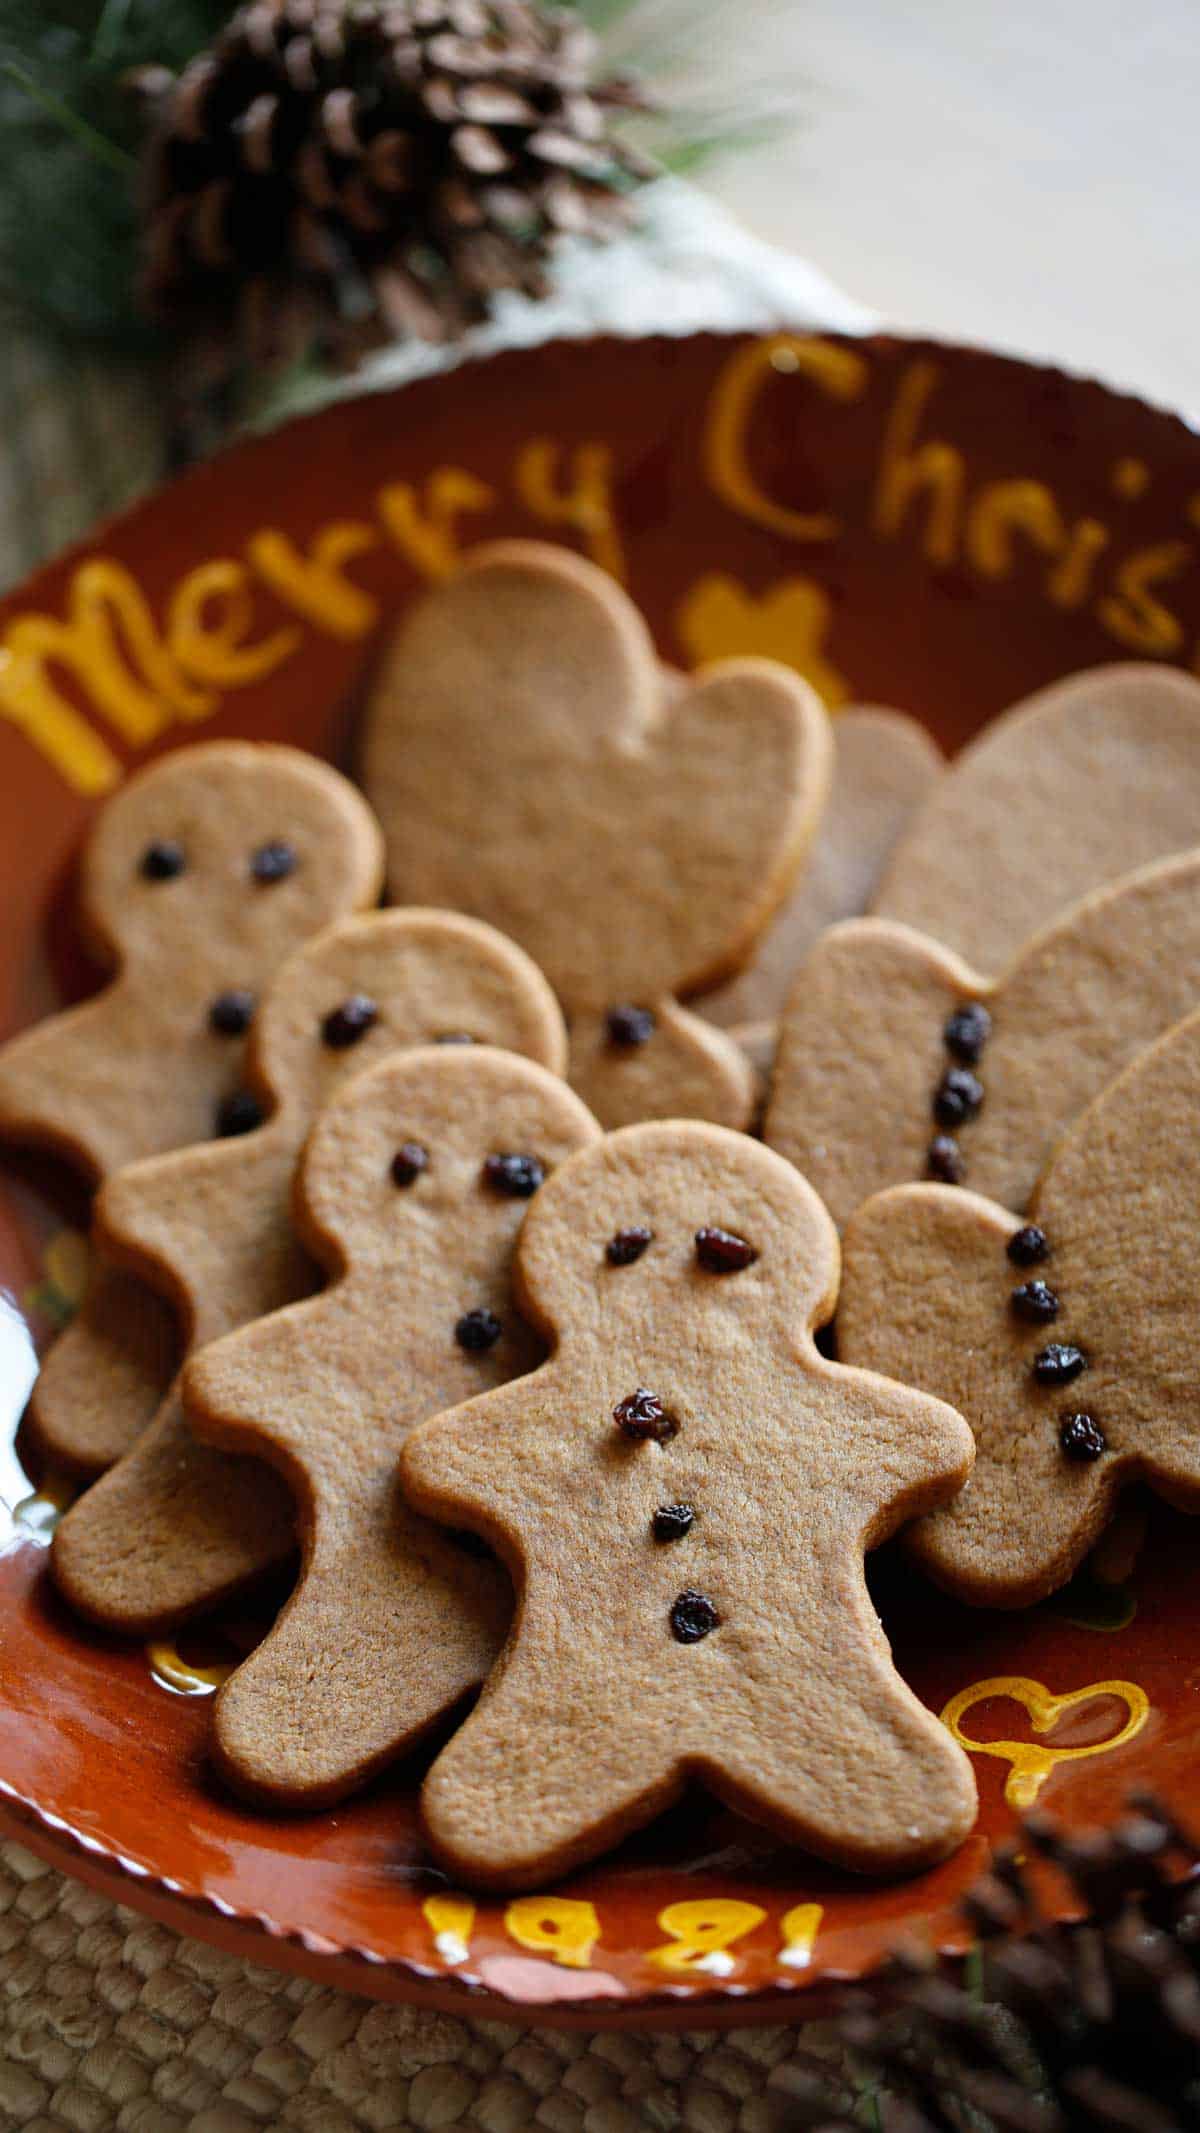 Gingerbread men on a plate